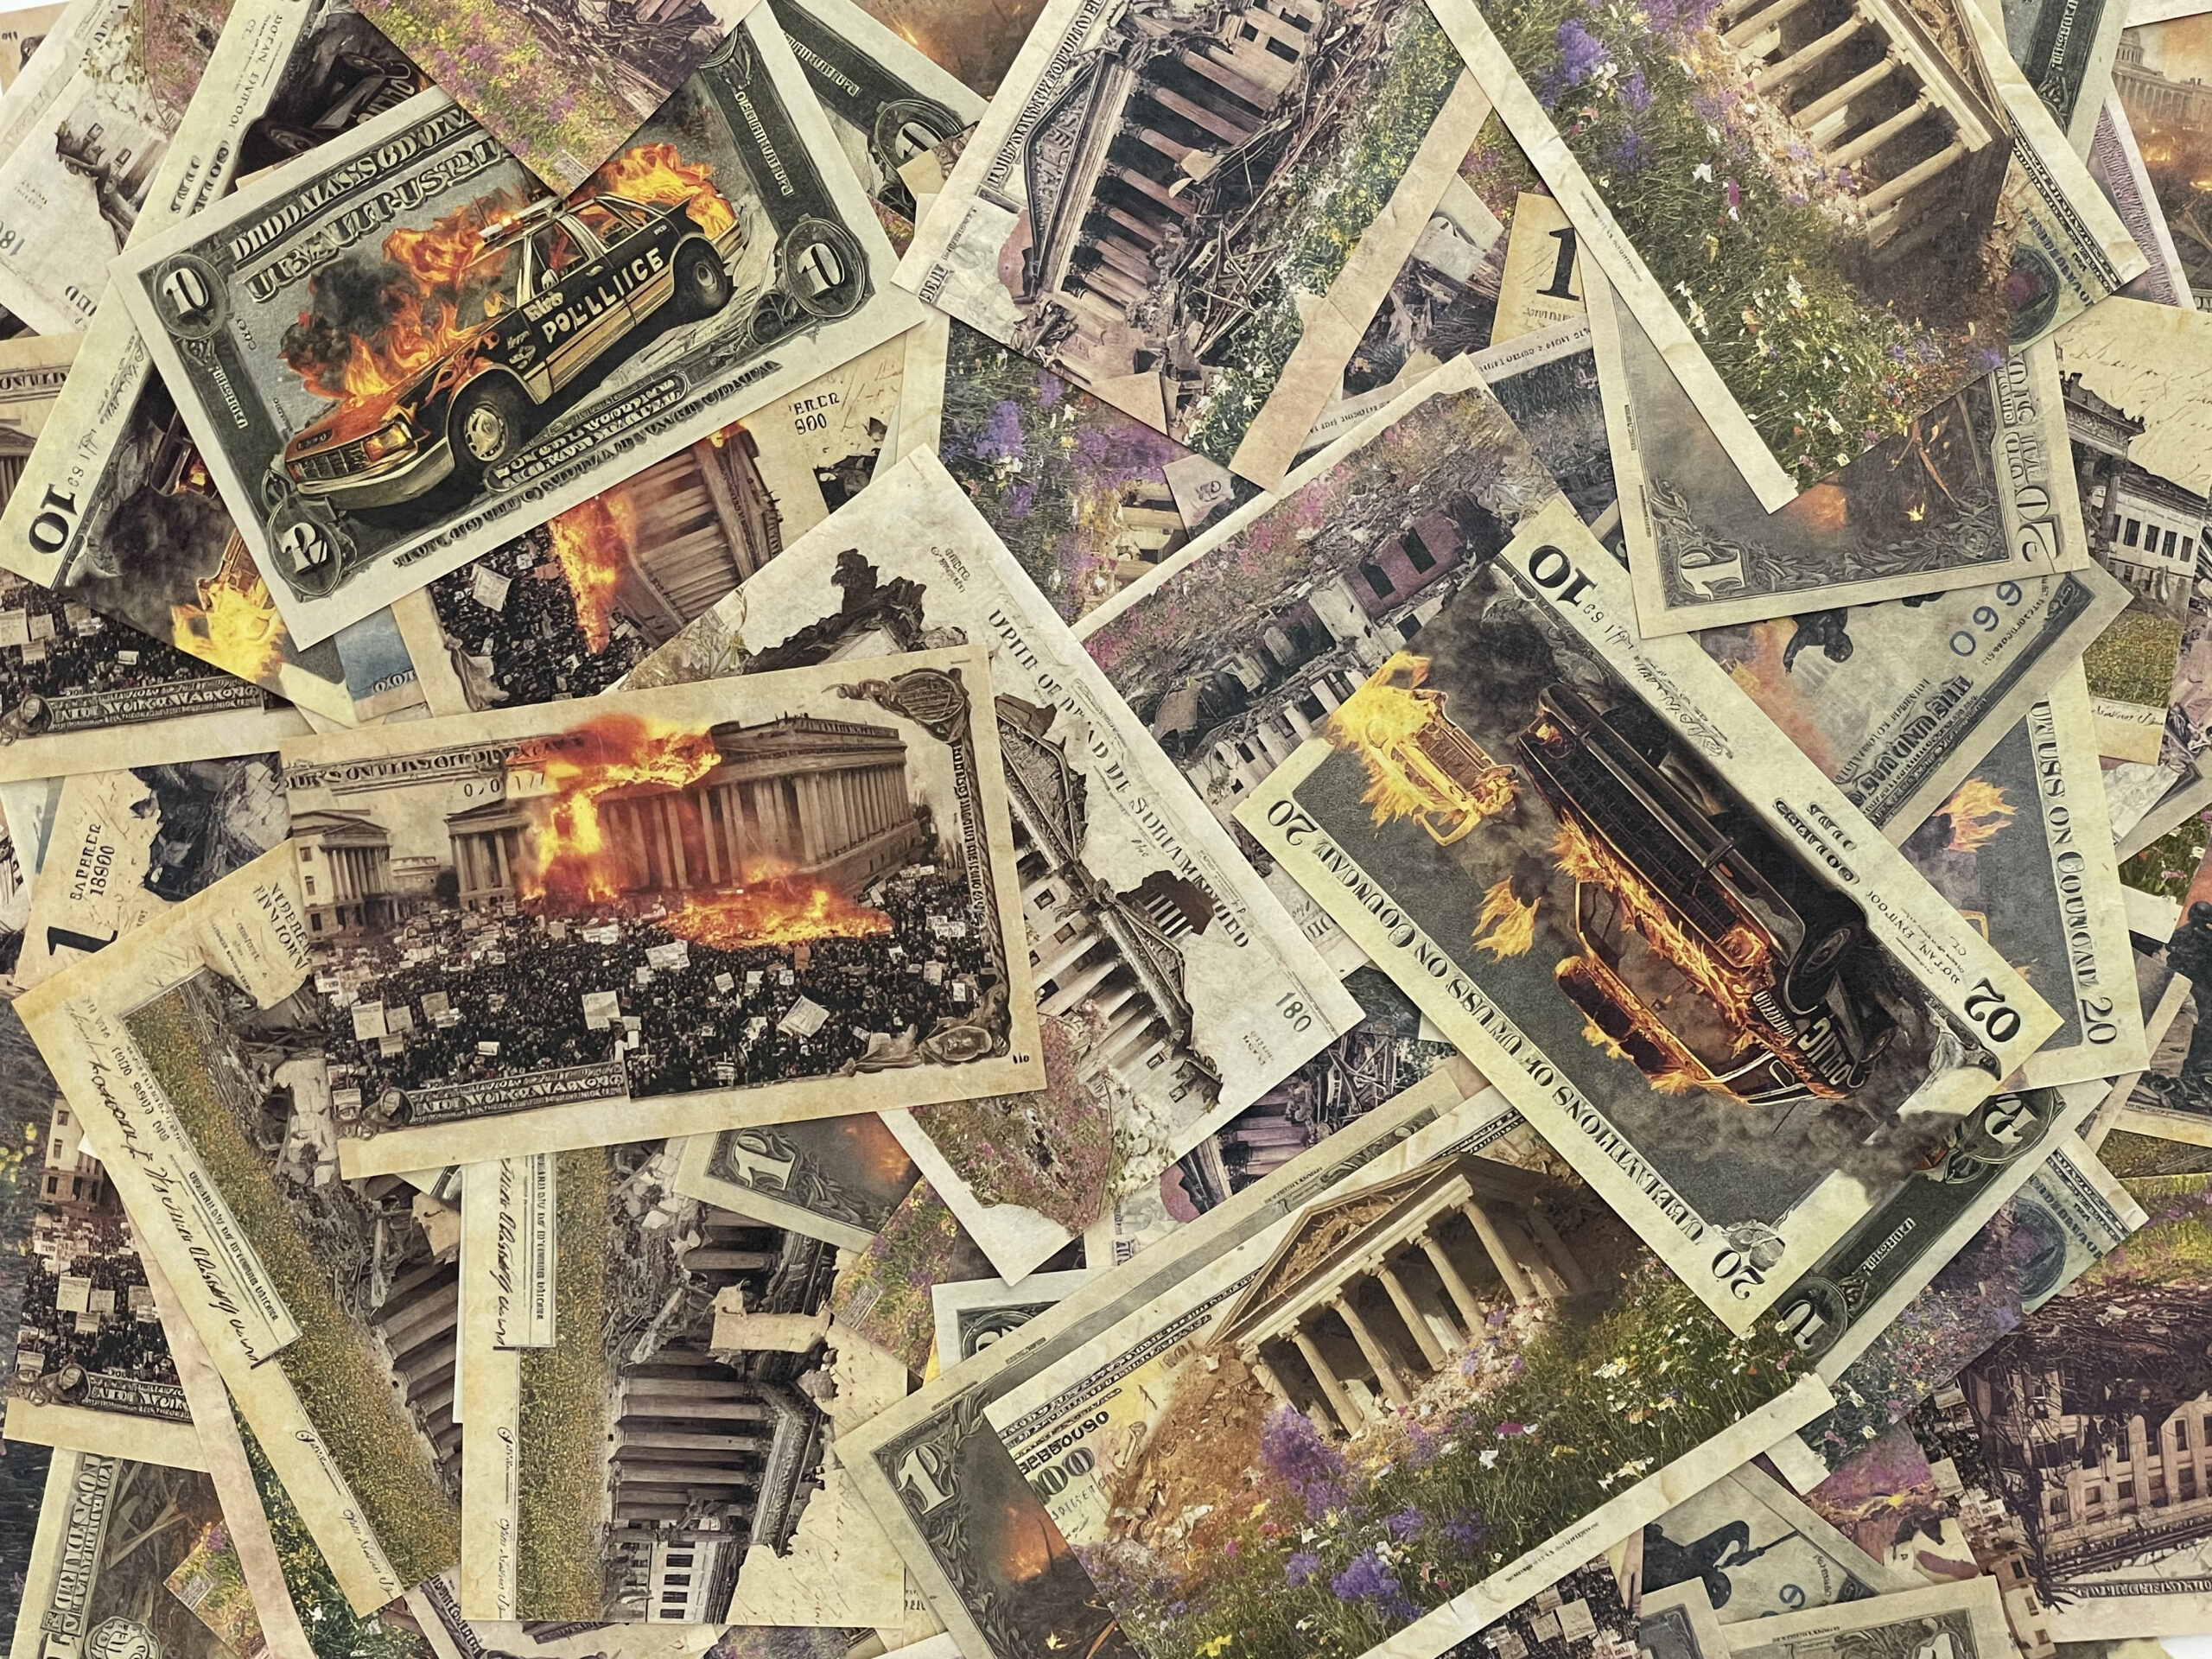 Image of scatterings of money depicting buildings and cars in disarray and on fire.